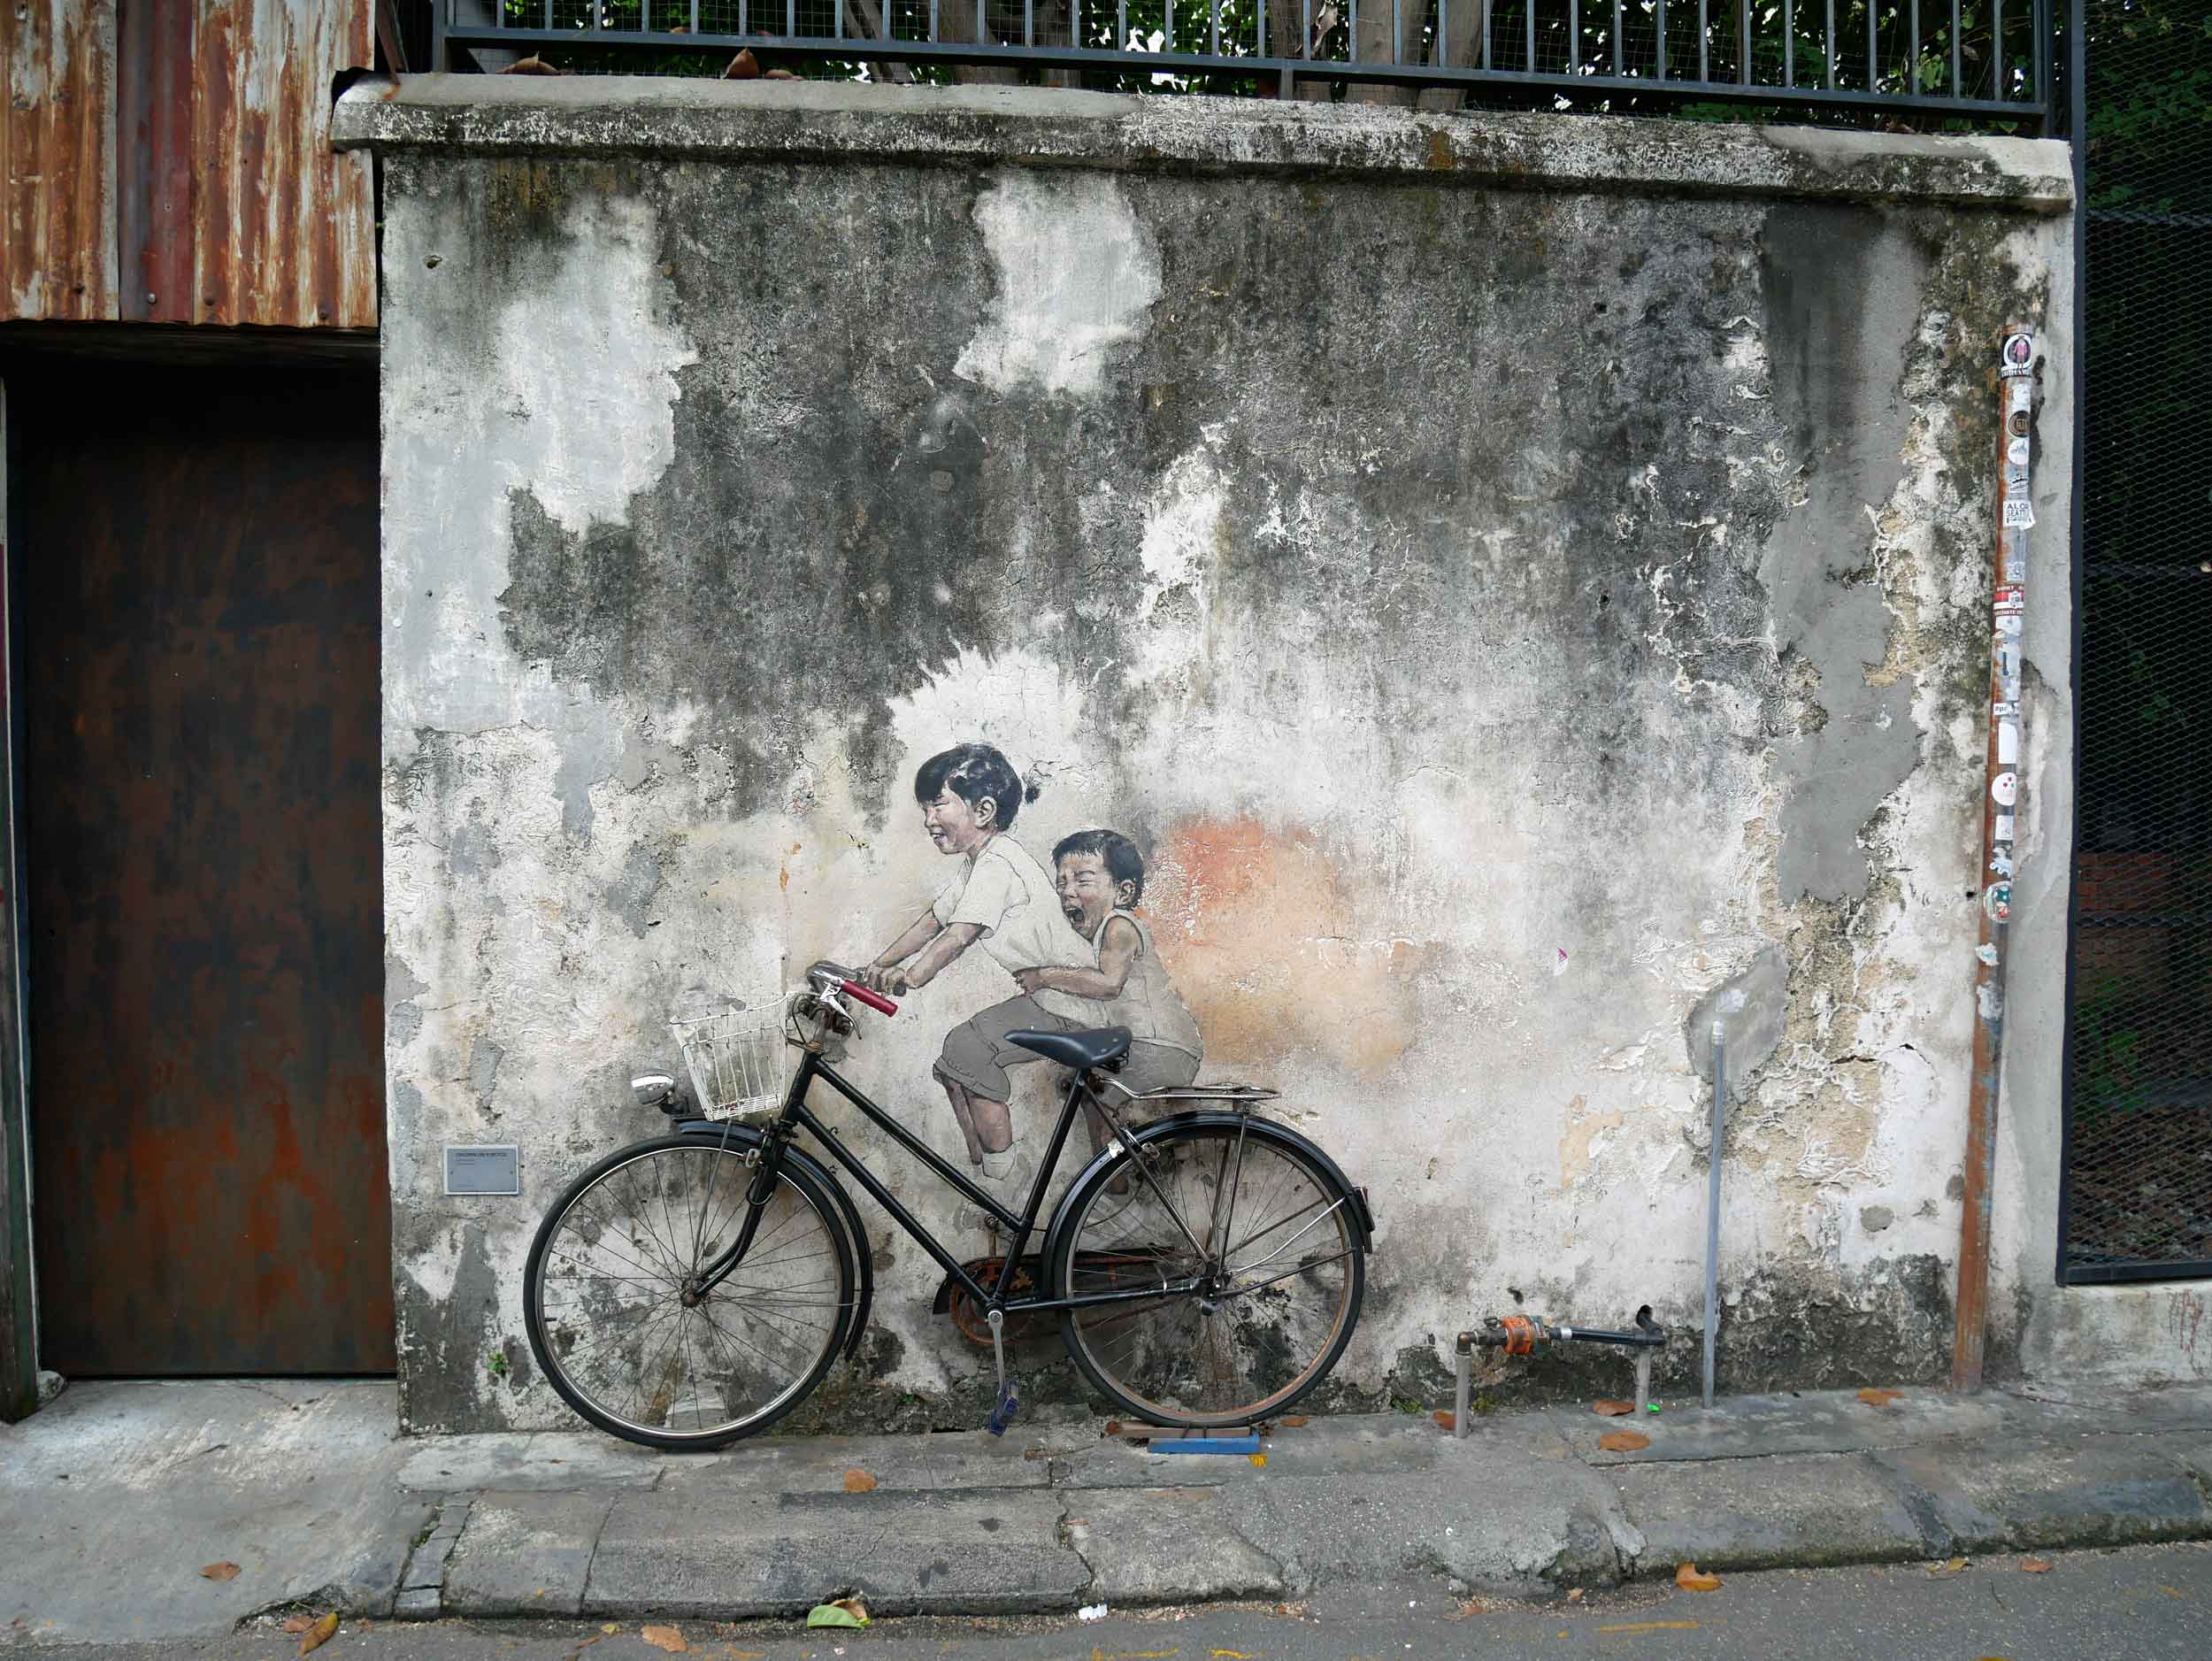  One of the more famous works by Lithuanian artist Ernest Zacharevic,  Children on Bicycle .&nbsp; 